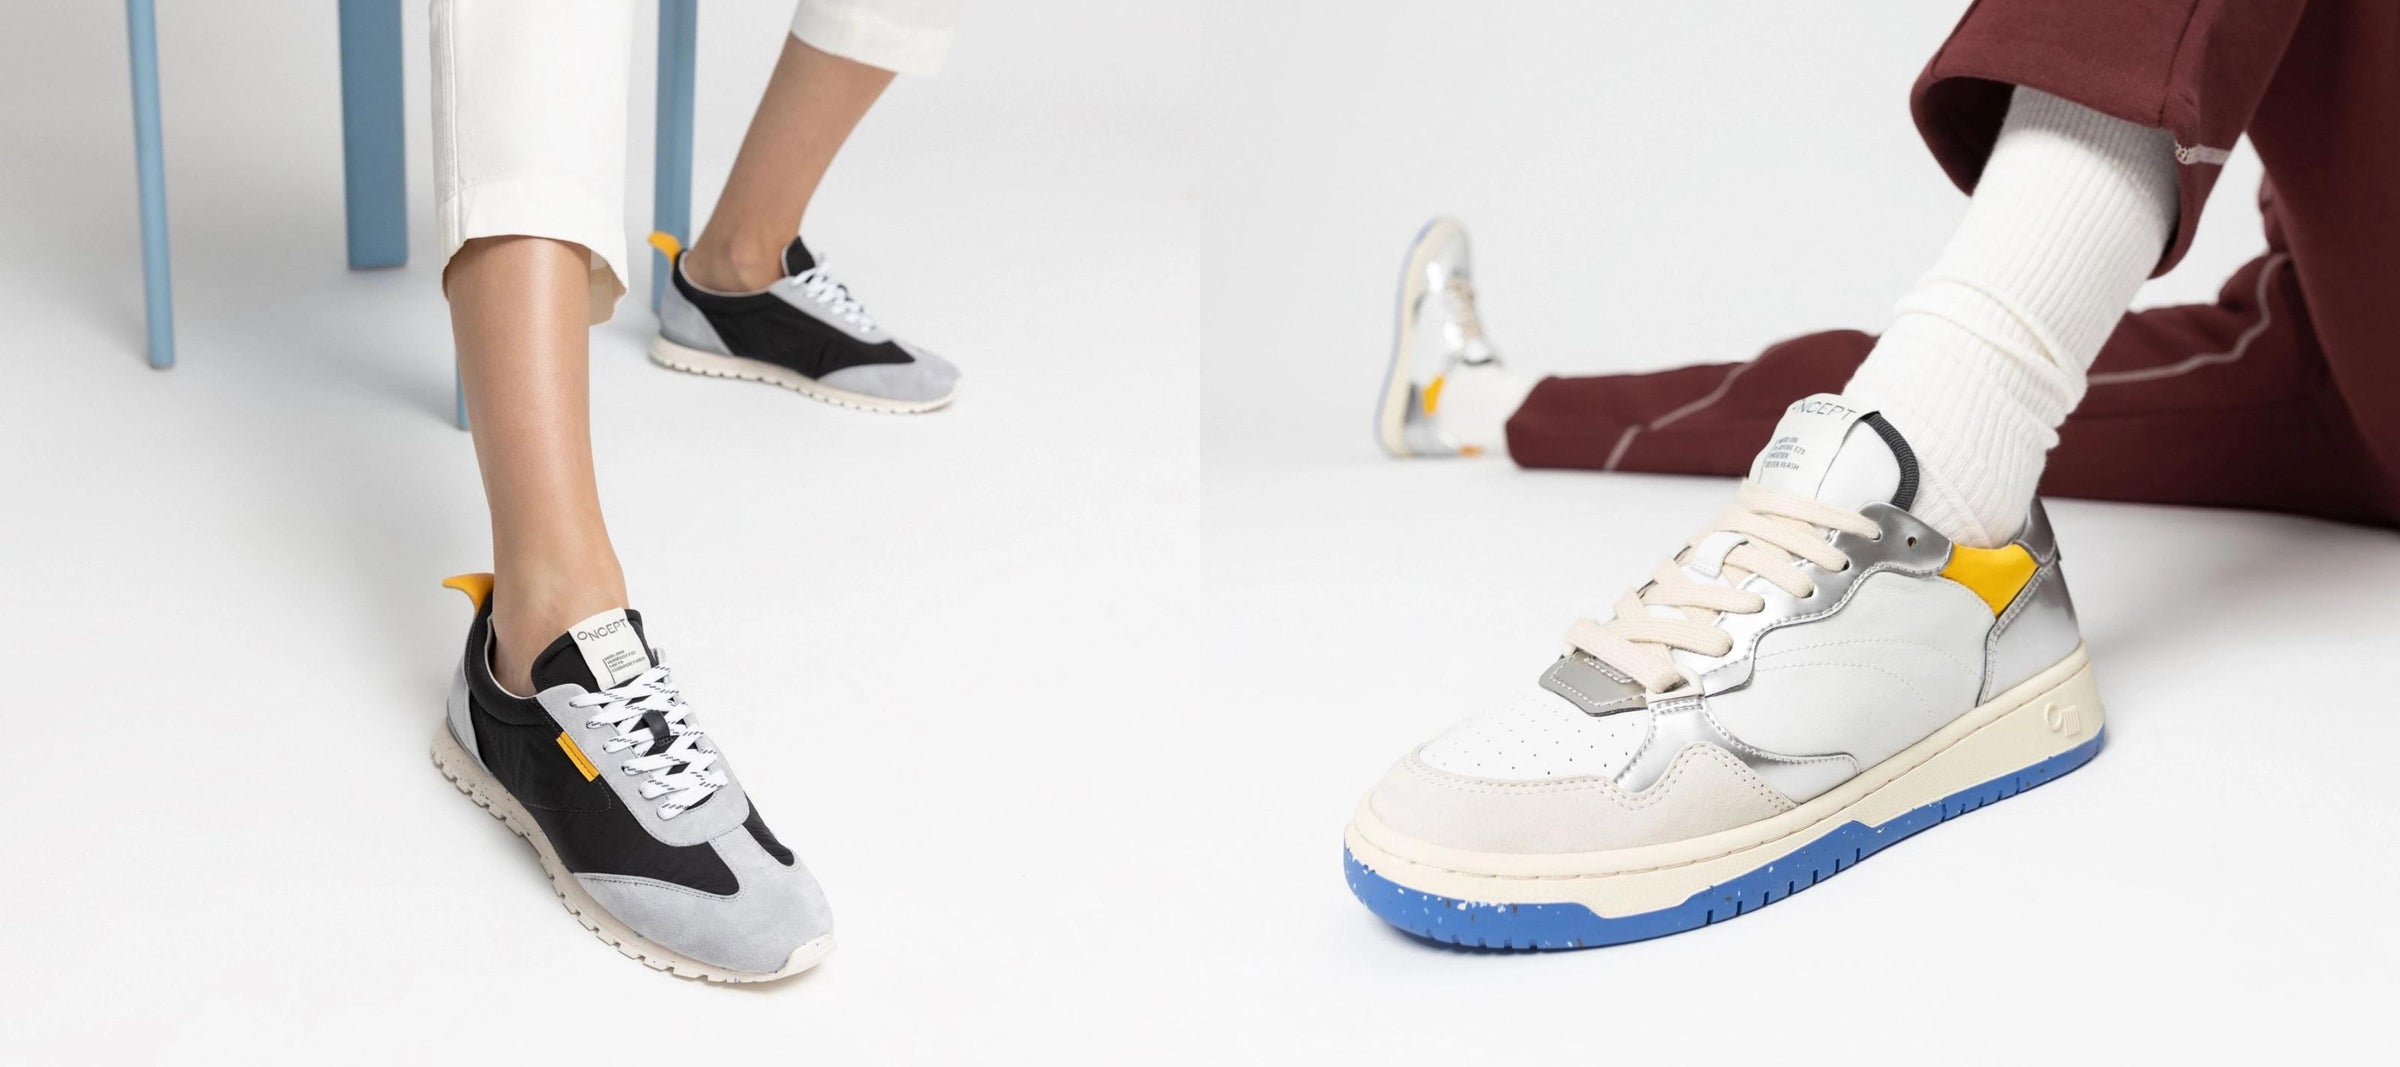 shop oncept eco-friendly sneakers for spring style